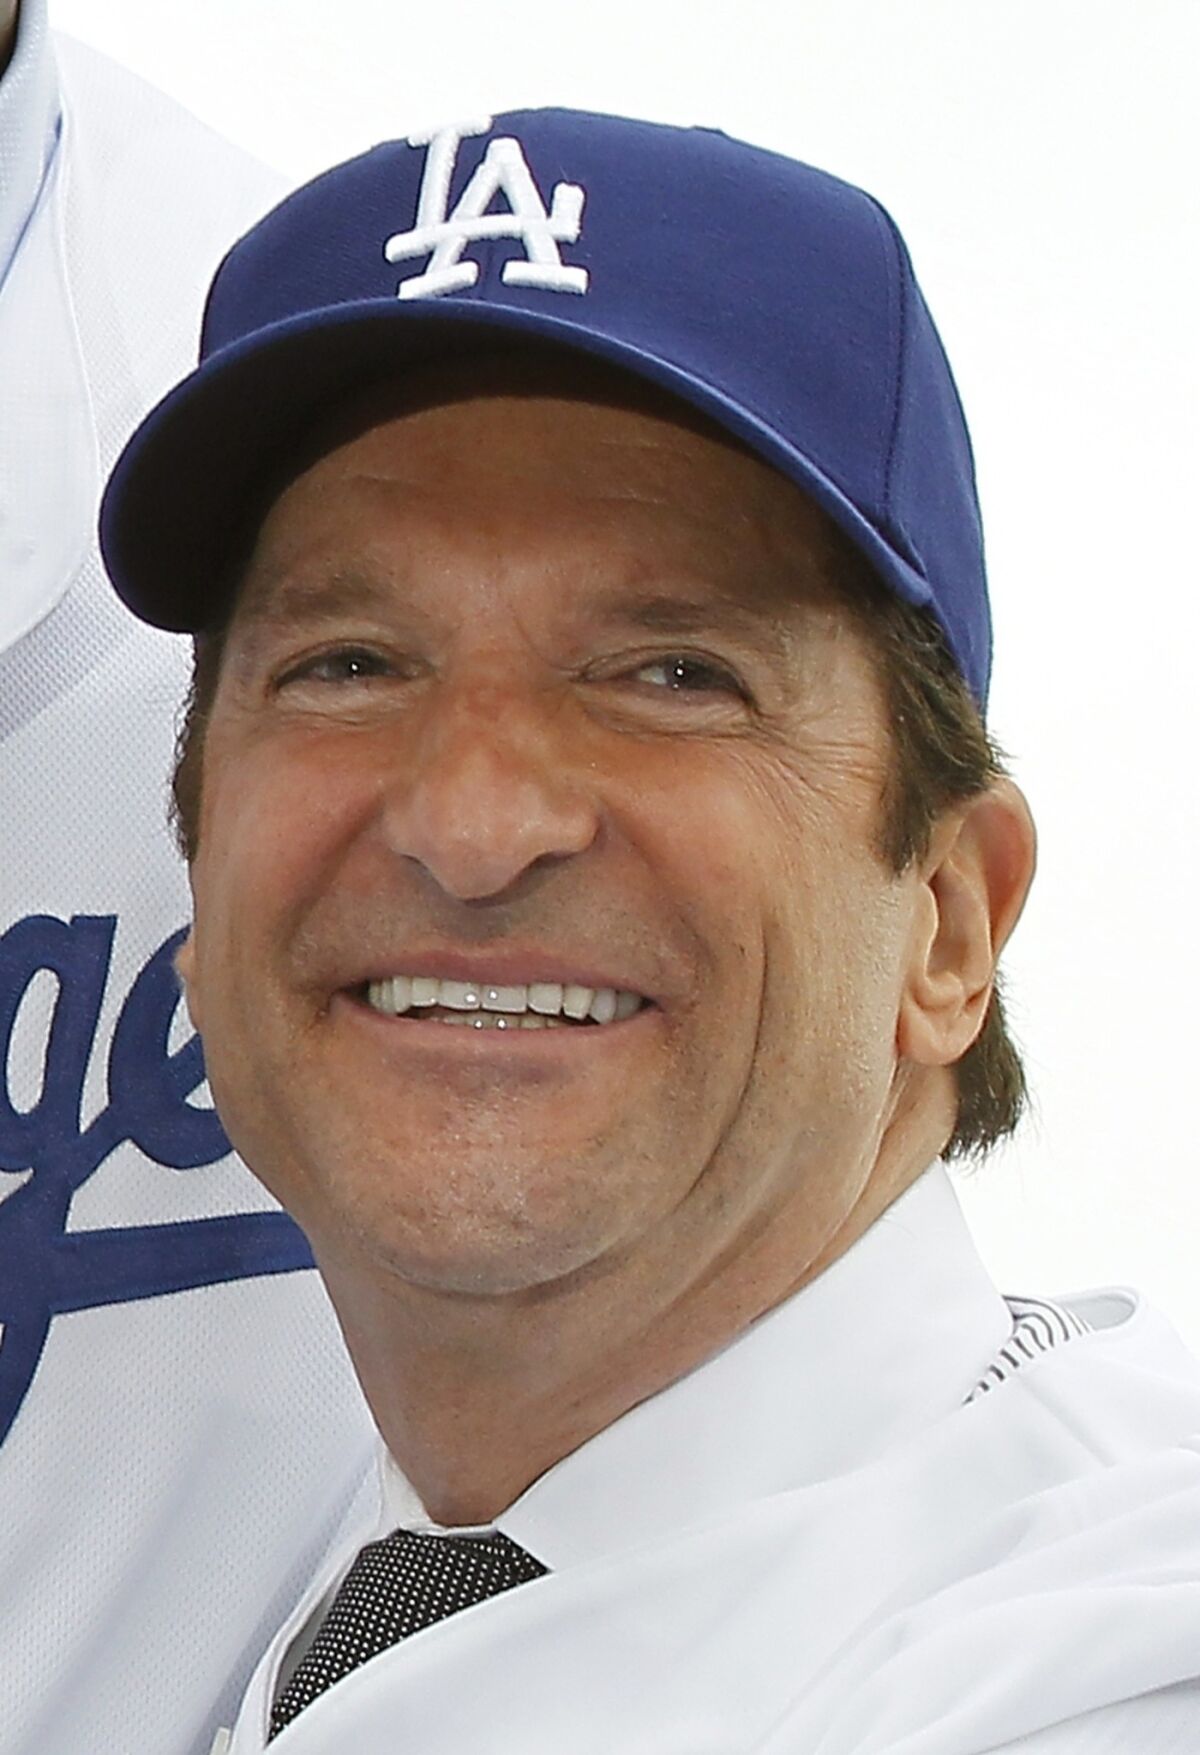 Dodgers co-owner Peter Guber said he has no interest in buying the Oakland Athletics contradictory to a report that linked him and his ownership partner in the Golden State Warriors were exploring the possibility of purchasing the franchise.